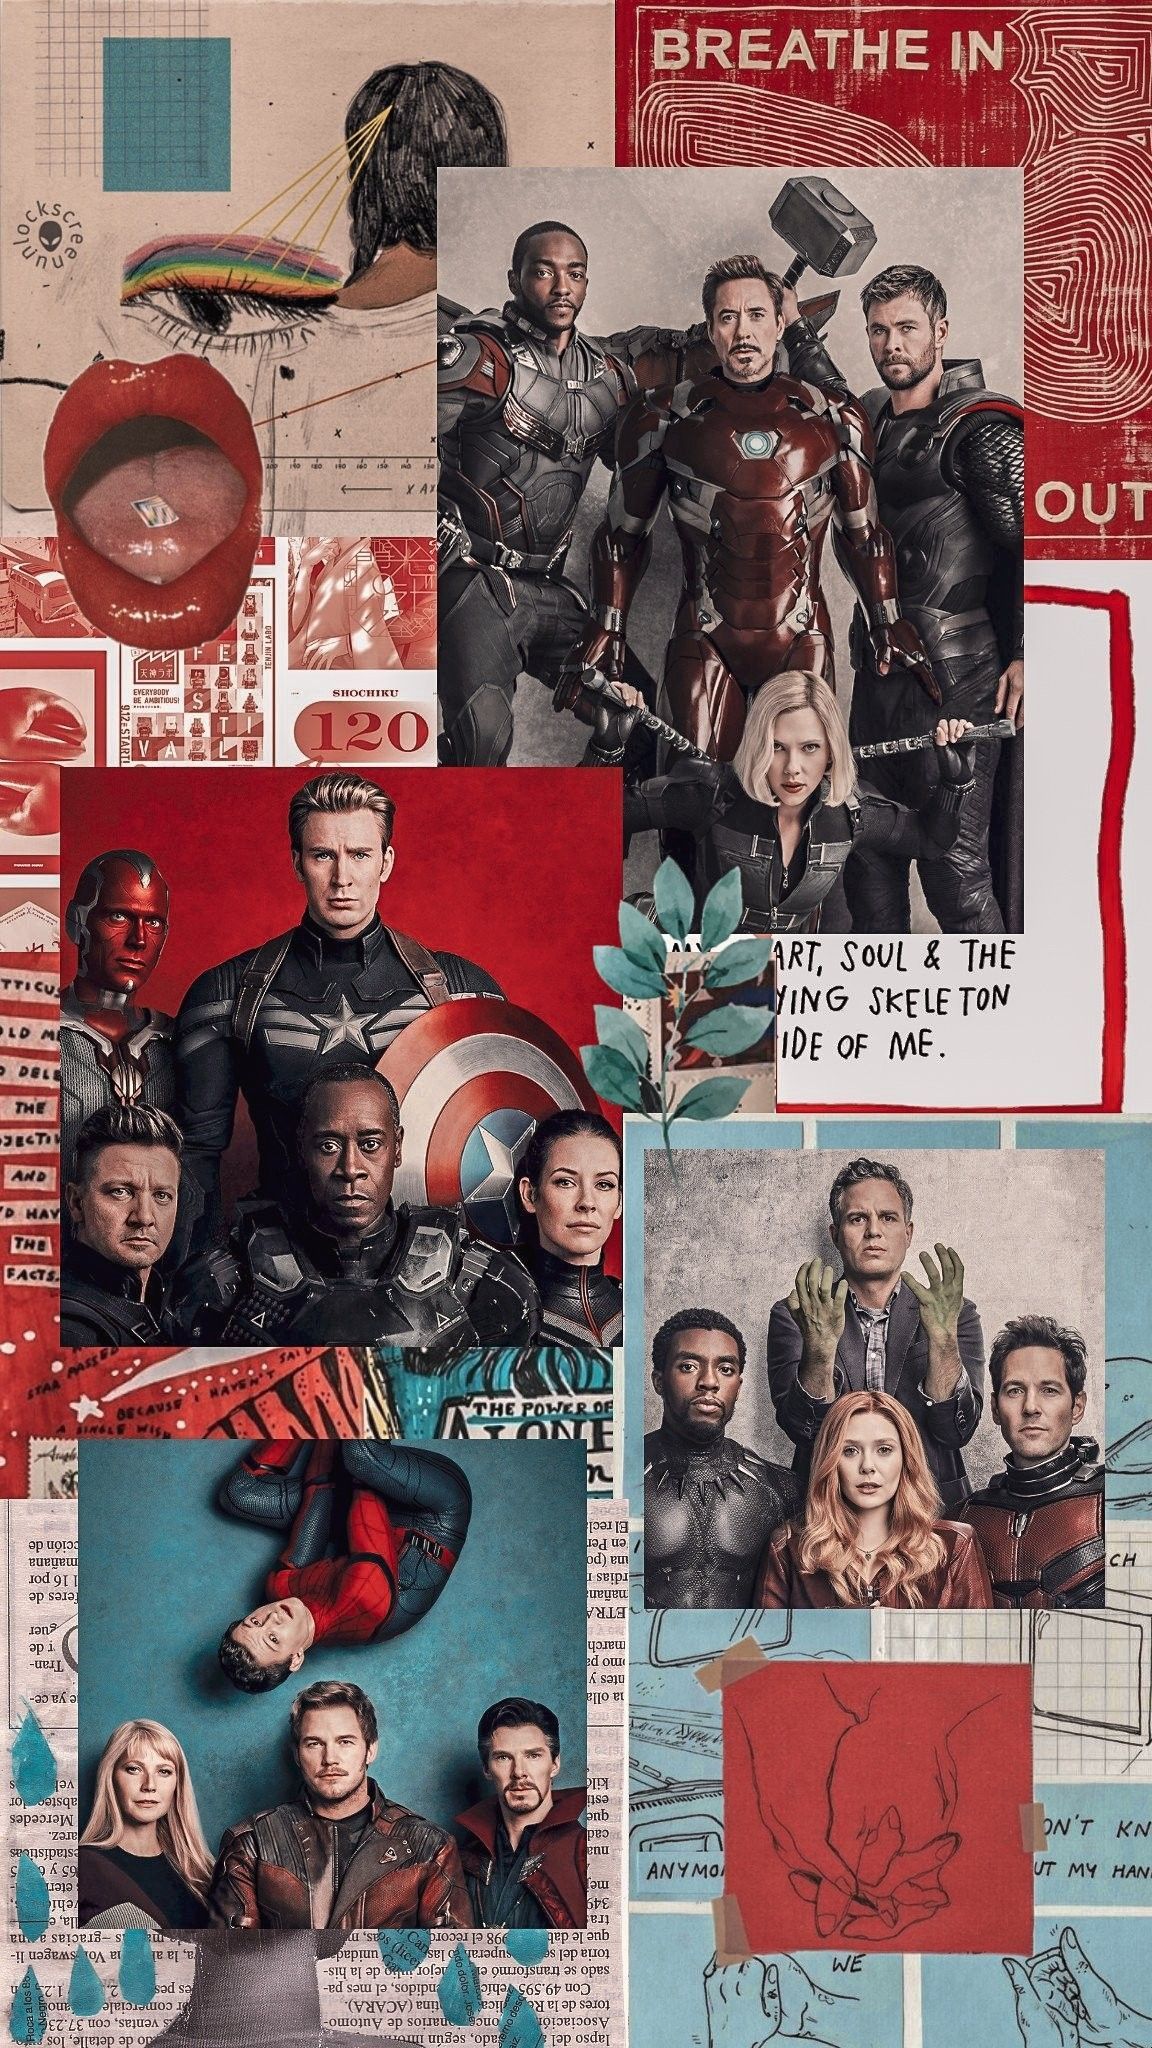 I made a collage of the marvel characters - Avengers